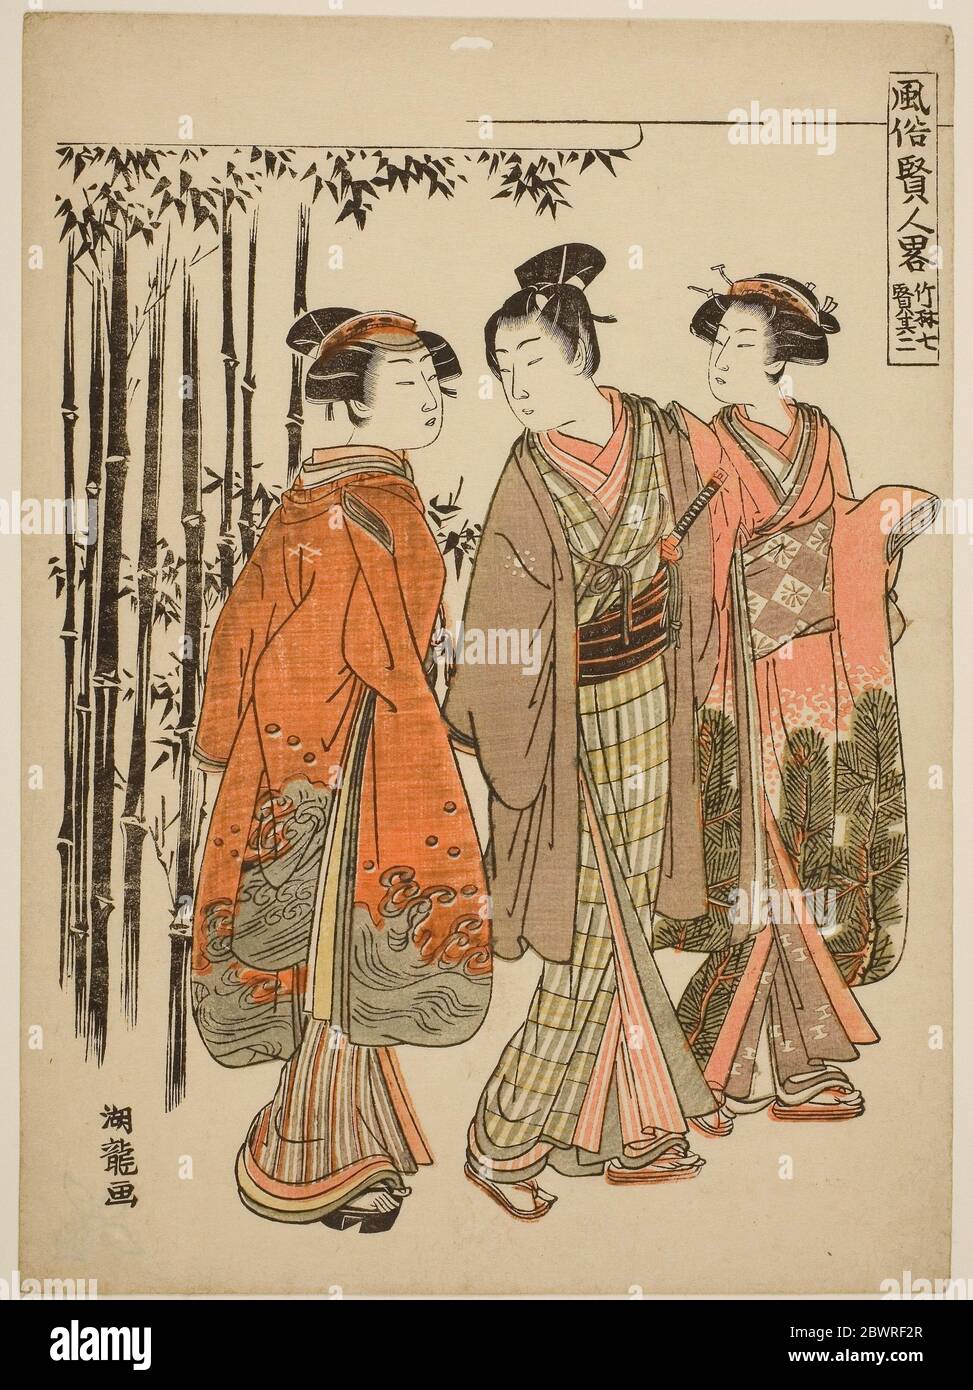 Author: Isoda Koryusai. Seven Sages of the Bamboo Grove - No. 2 (Chikurin shichiken sono ni), from the series 'Popular Versions of Sages (Fuzoku Stock Photo